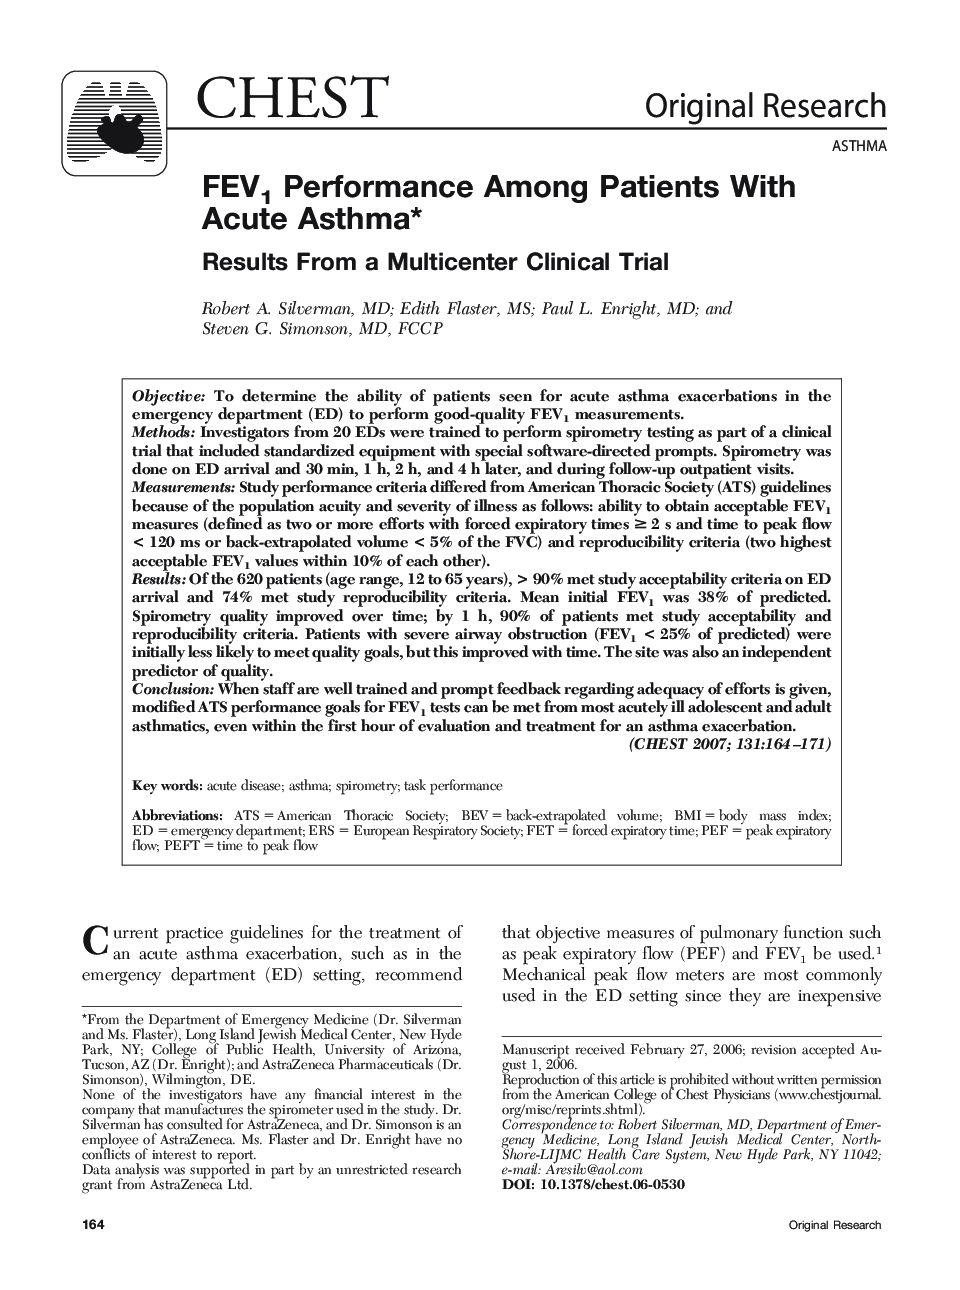 FEV1Performance Among Patients With Acute Asthma : Results From a Multicenter Clinical Trial